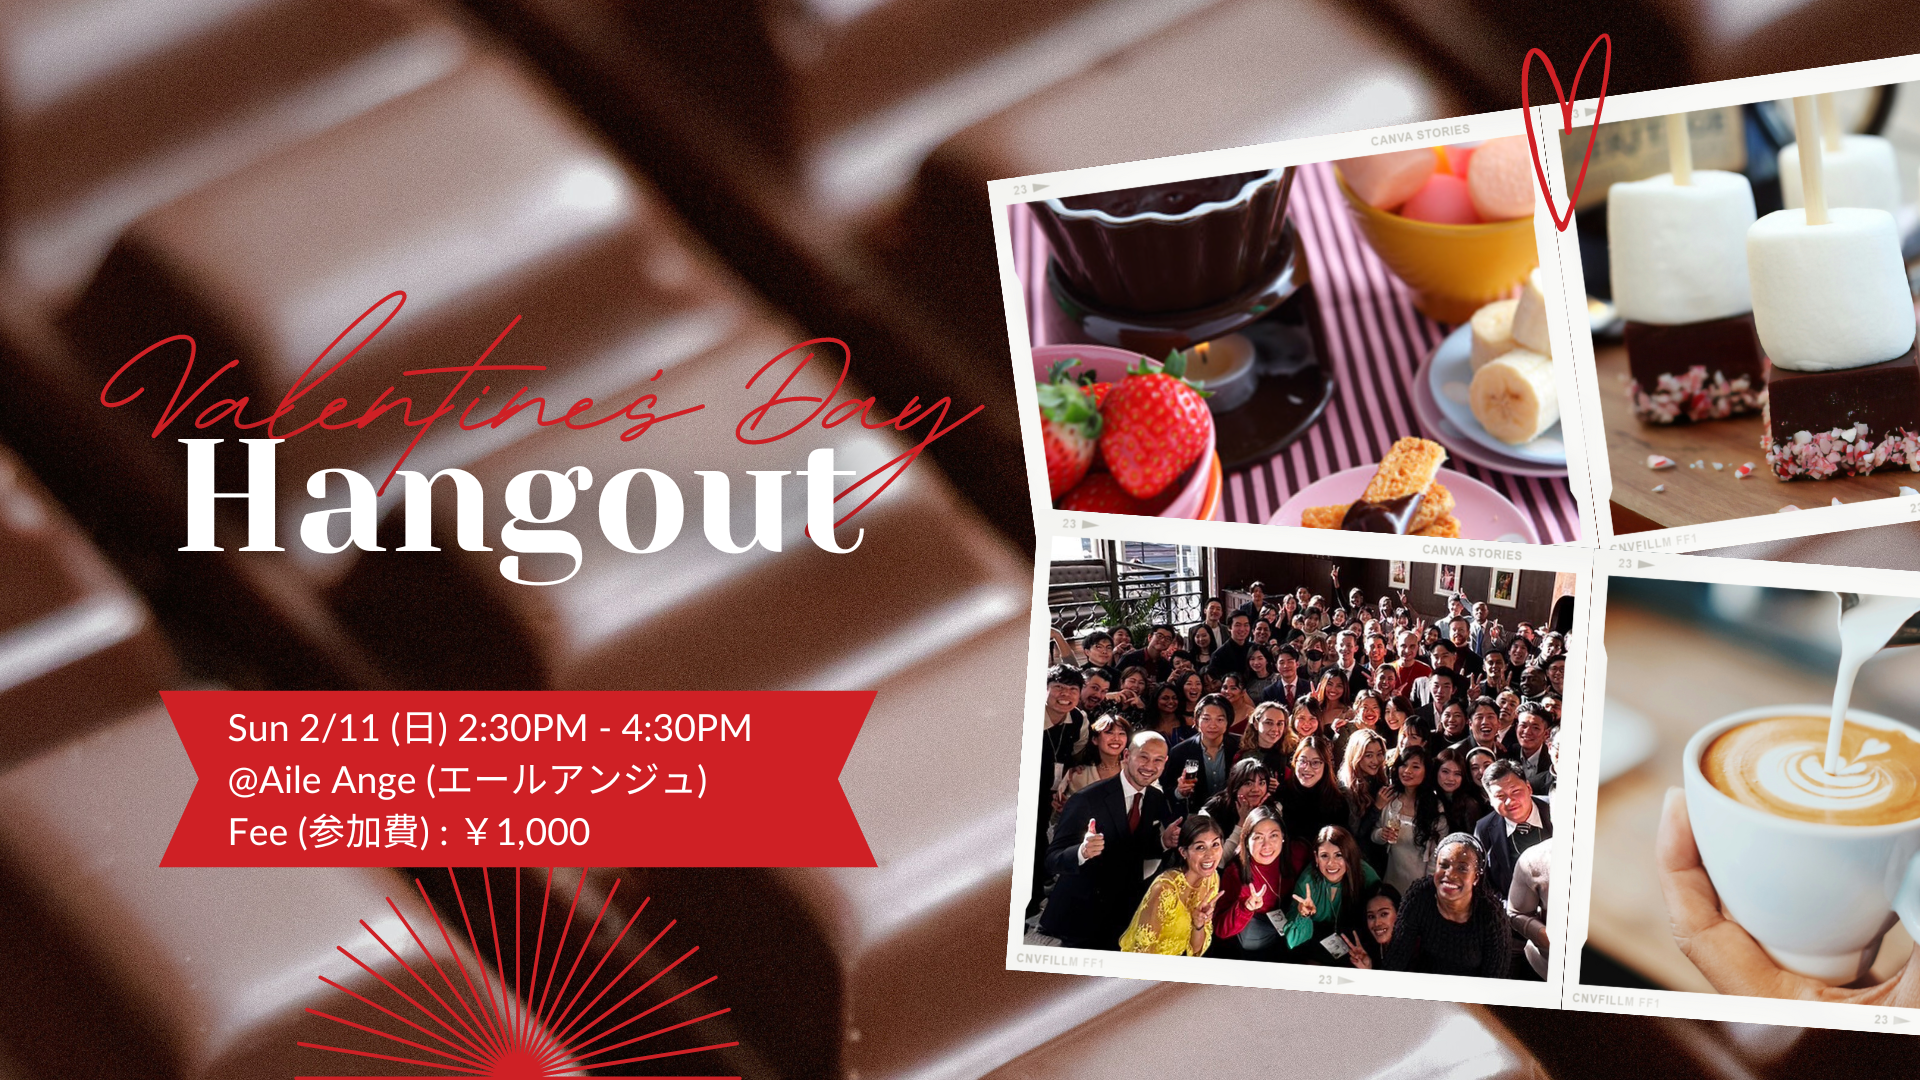 Featured image for “SUN 2/11 Valentine’s Day Hangout”